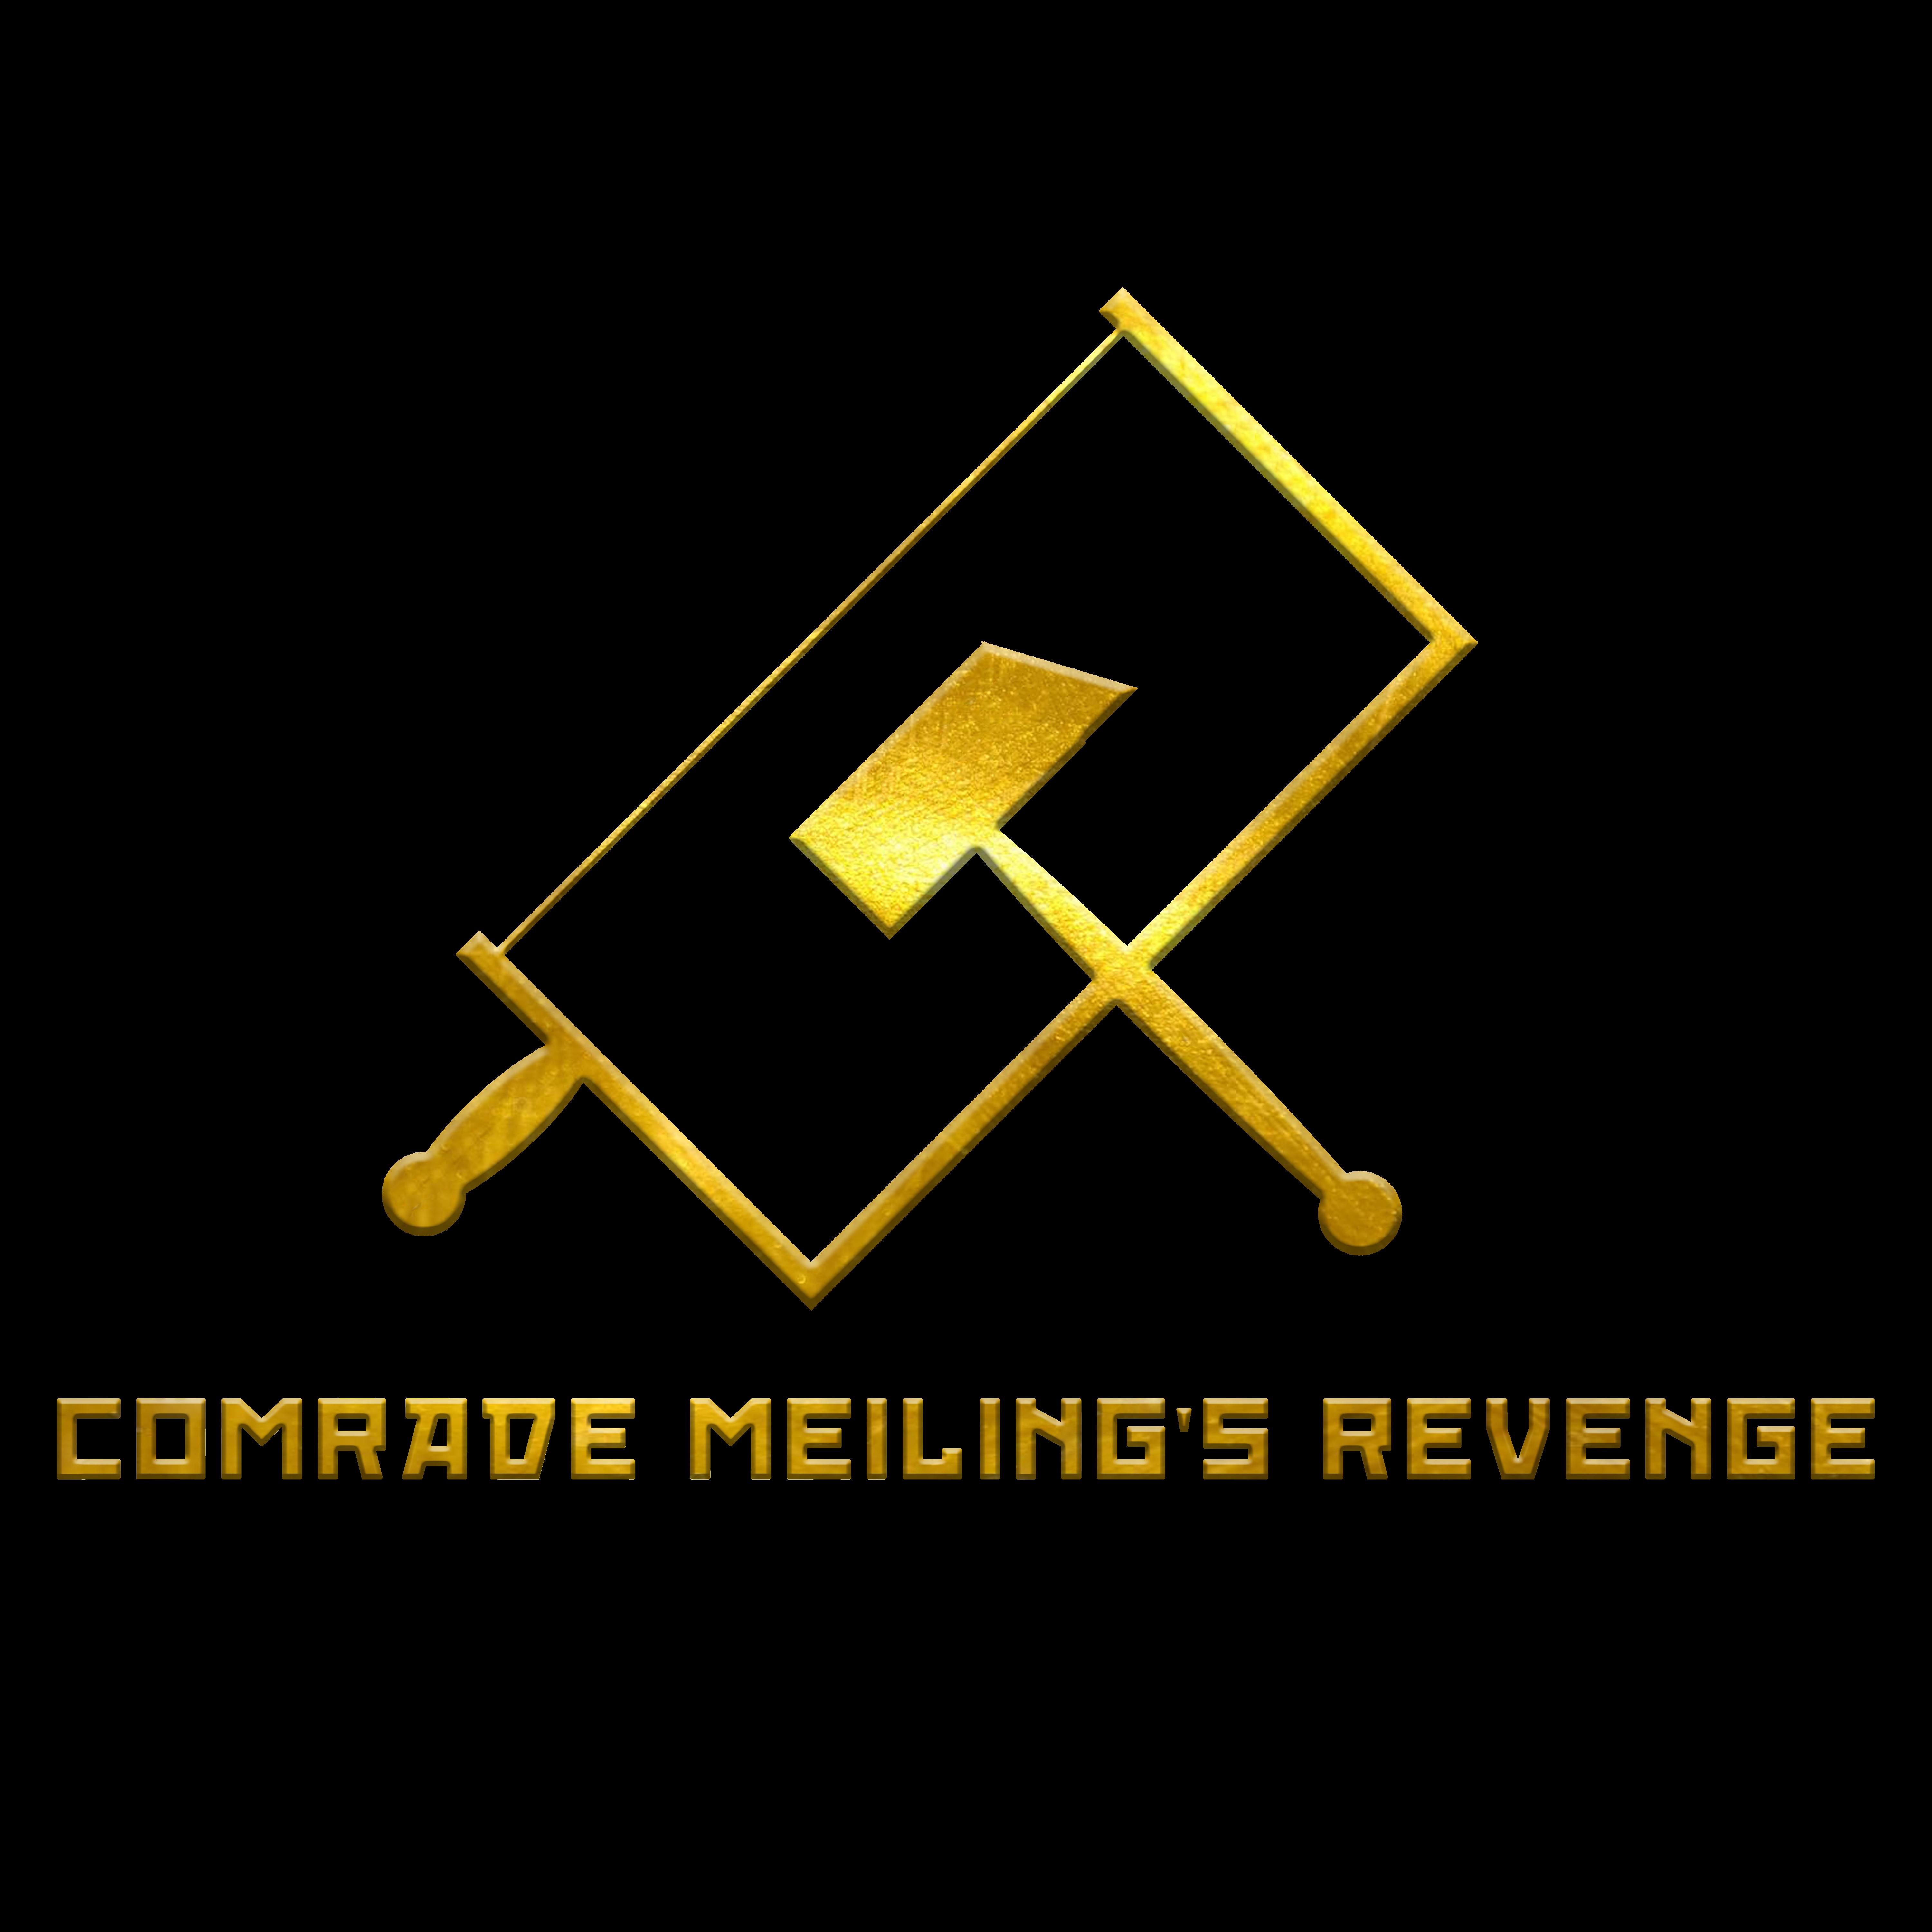 Team Revenge Logo - Mention modern robotics and you're going to the gulags. Our team